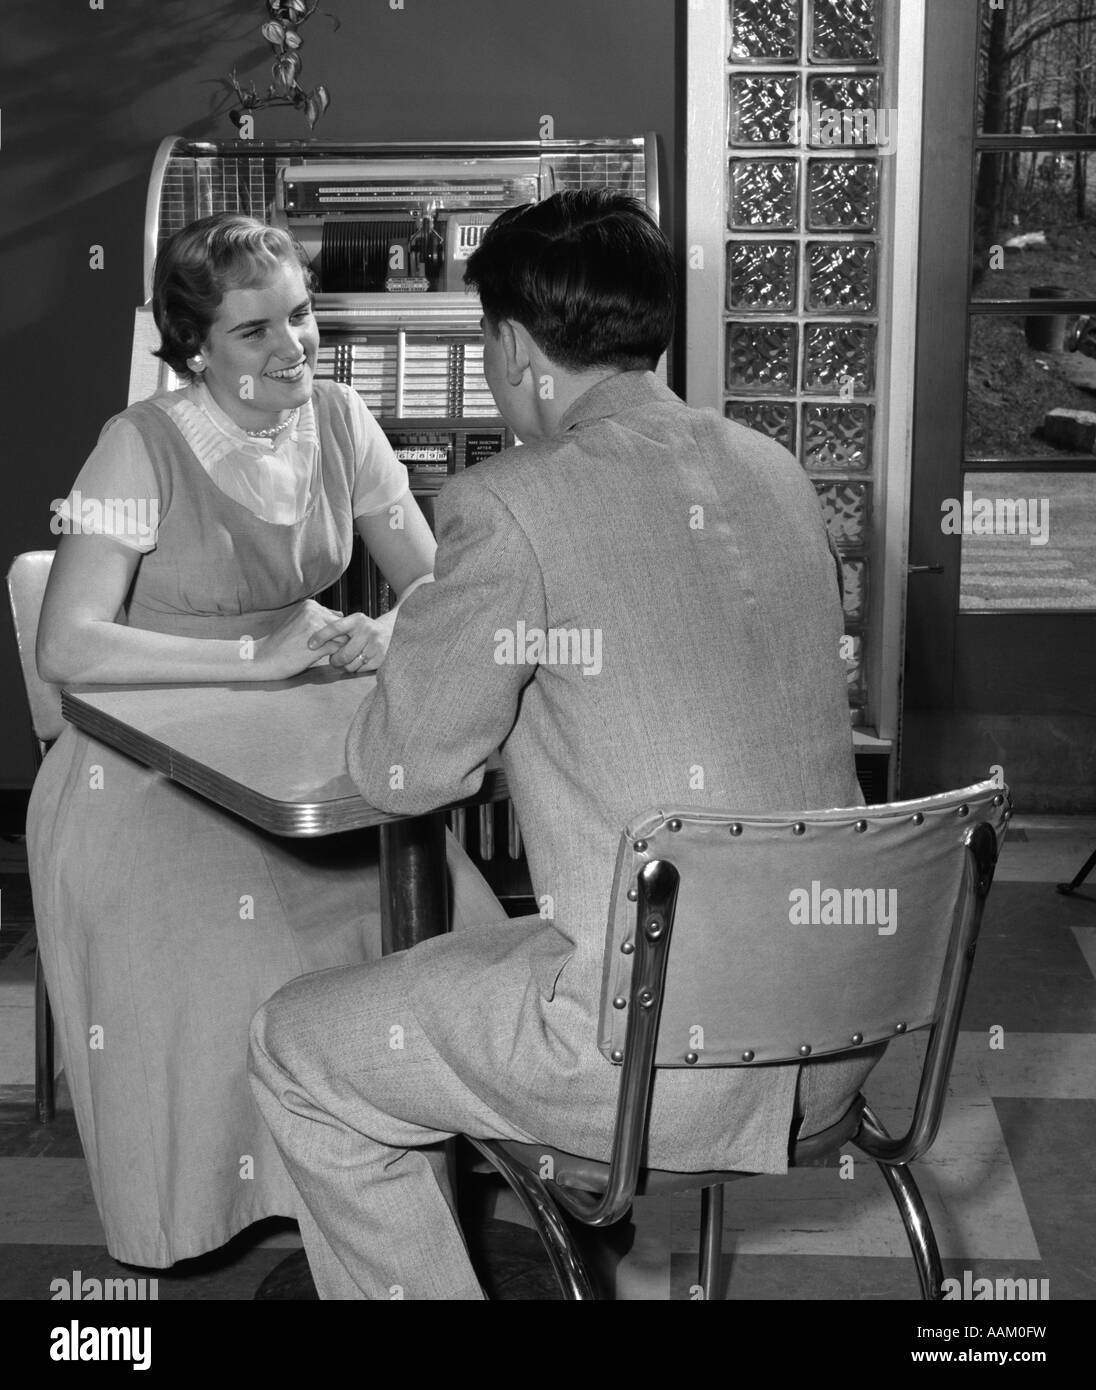 1950s TEEN COUPLE SITS AT TABLE IN DINER JUKEBOX IN BACKGROUND SMILING INDOOR Stock Photo